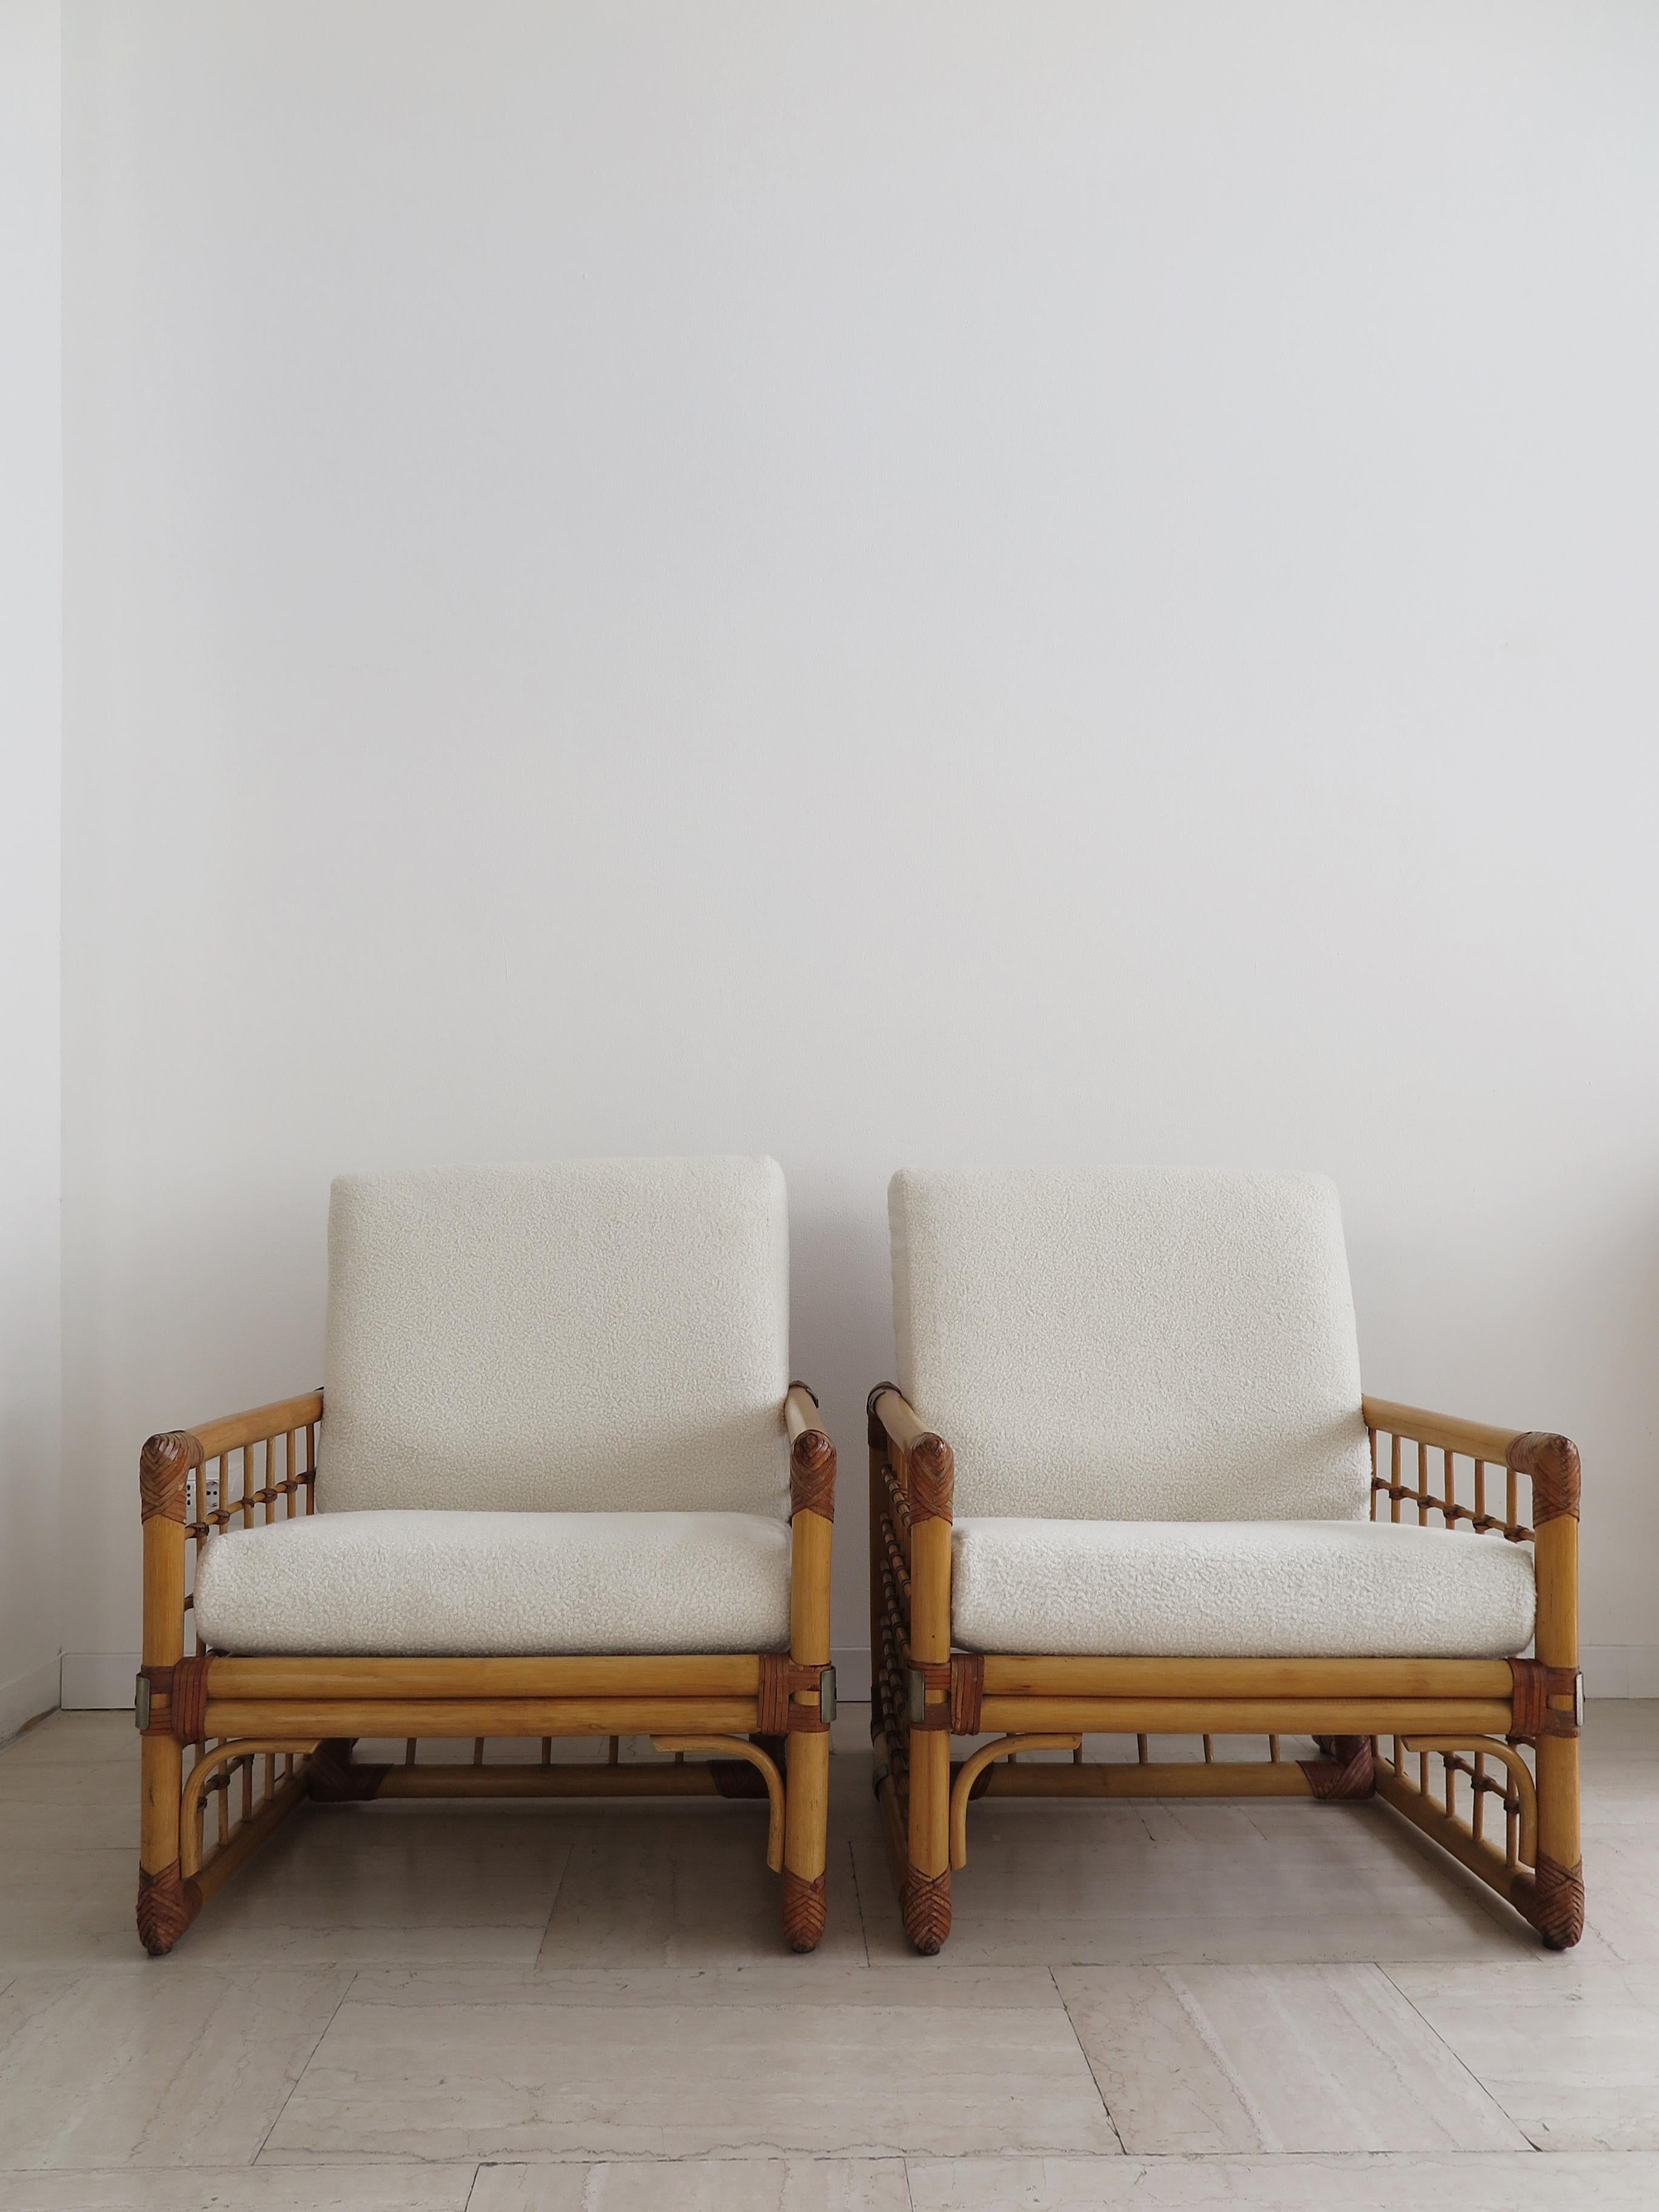 Pair of Italian midcentury modern design armchairs with bamboo frame, India cane, leather and metal details with bouclè fabric cushions, Italy production 1970s.

The cushions are tied to the backrest with a ribbon and rest at the base on a wire